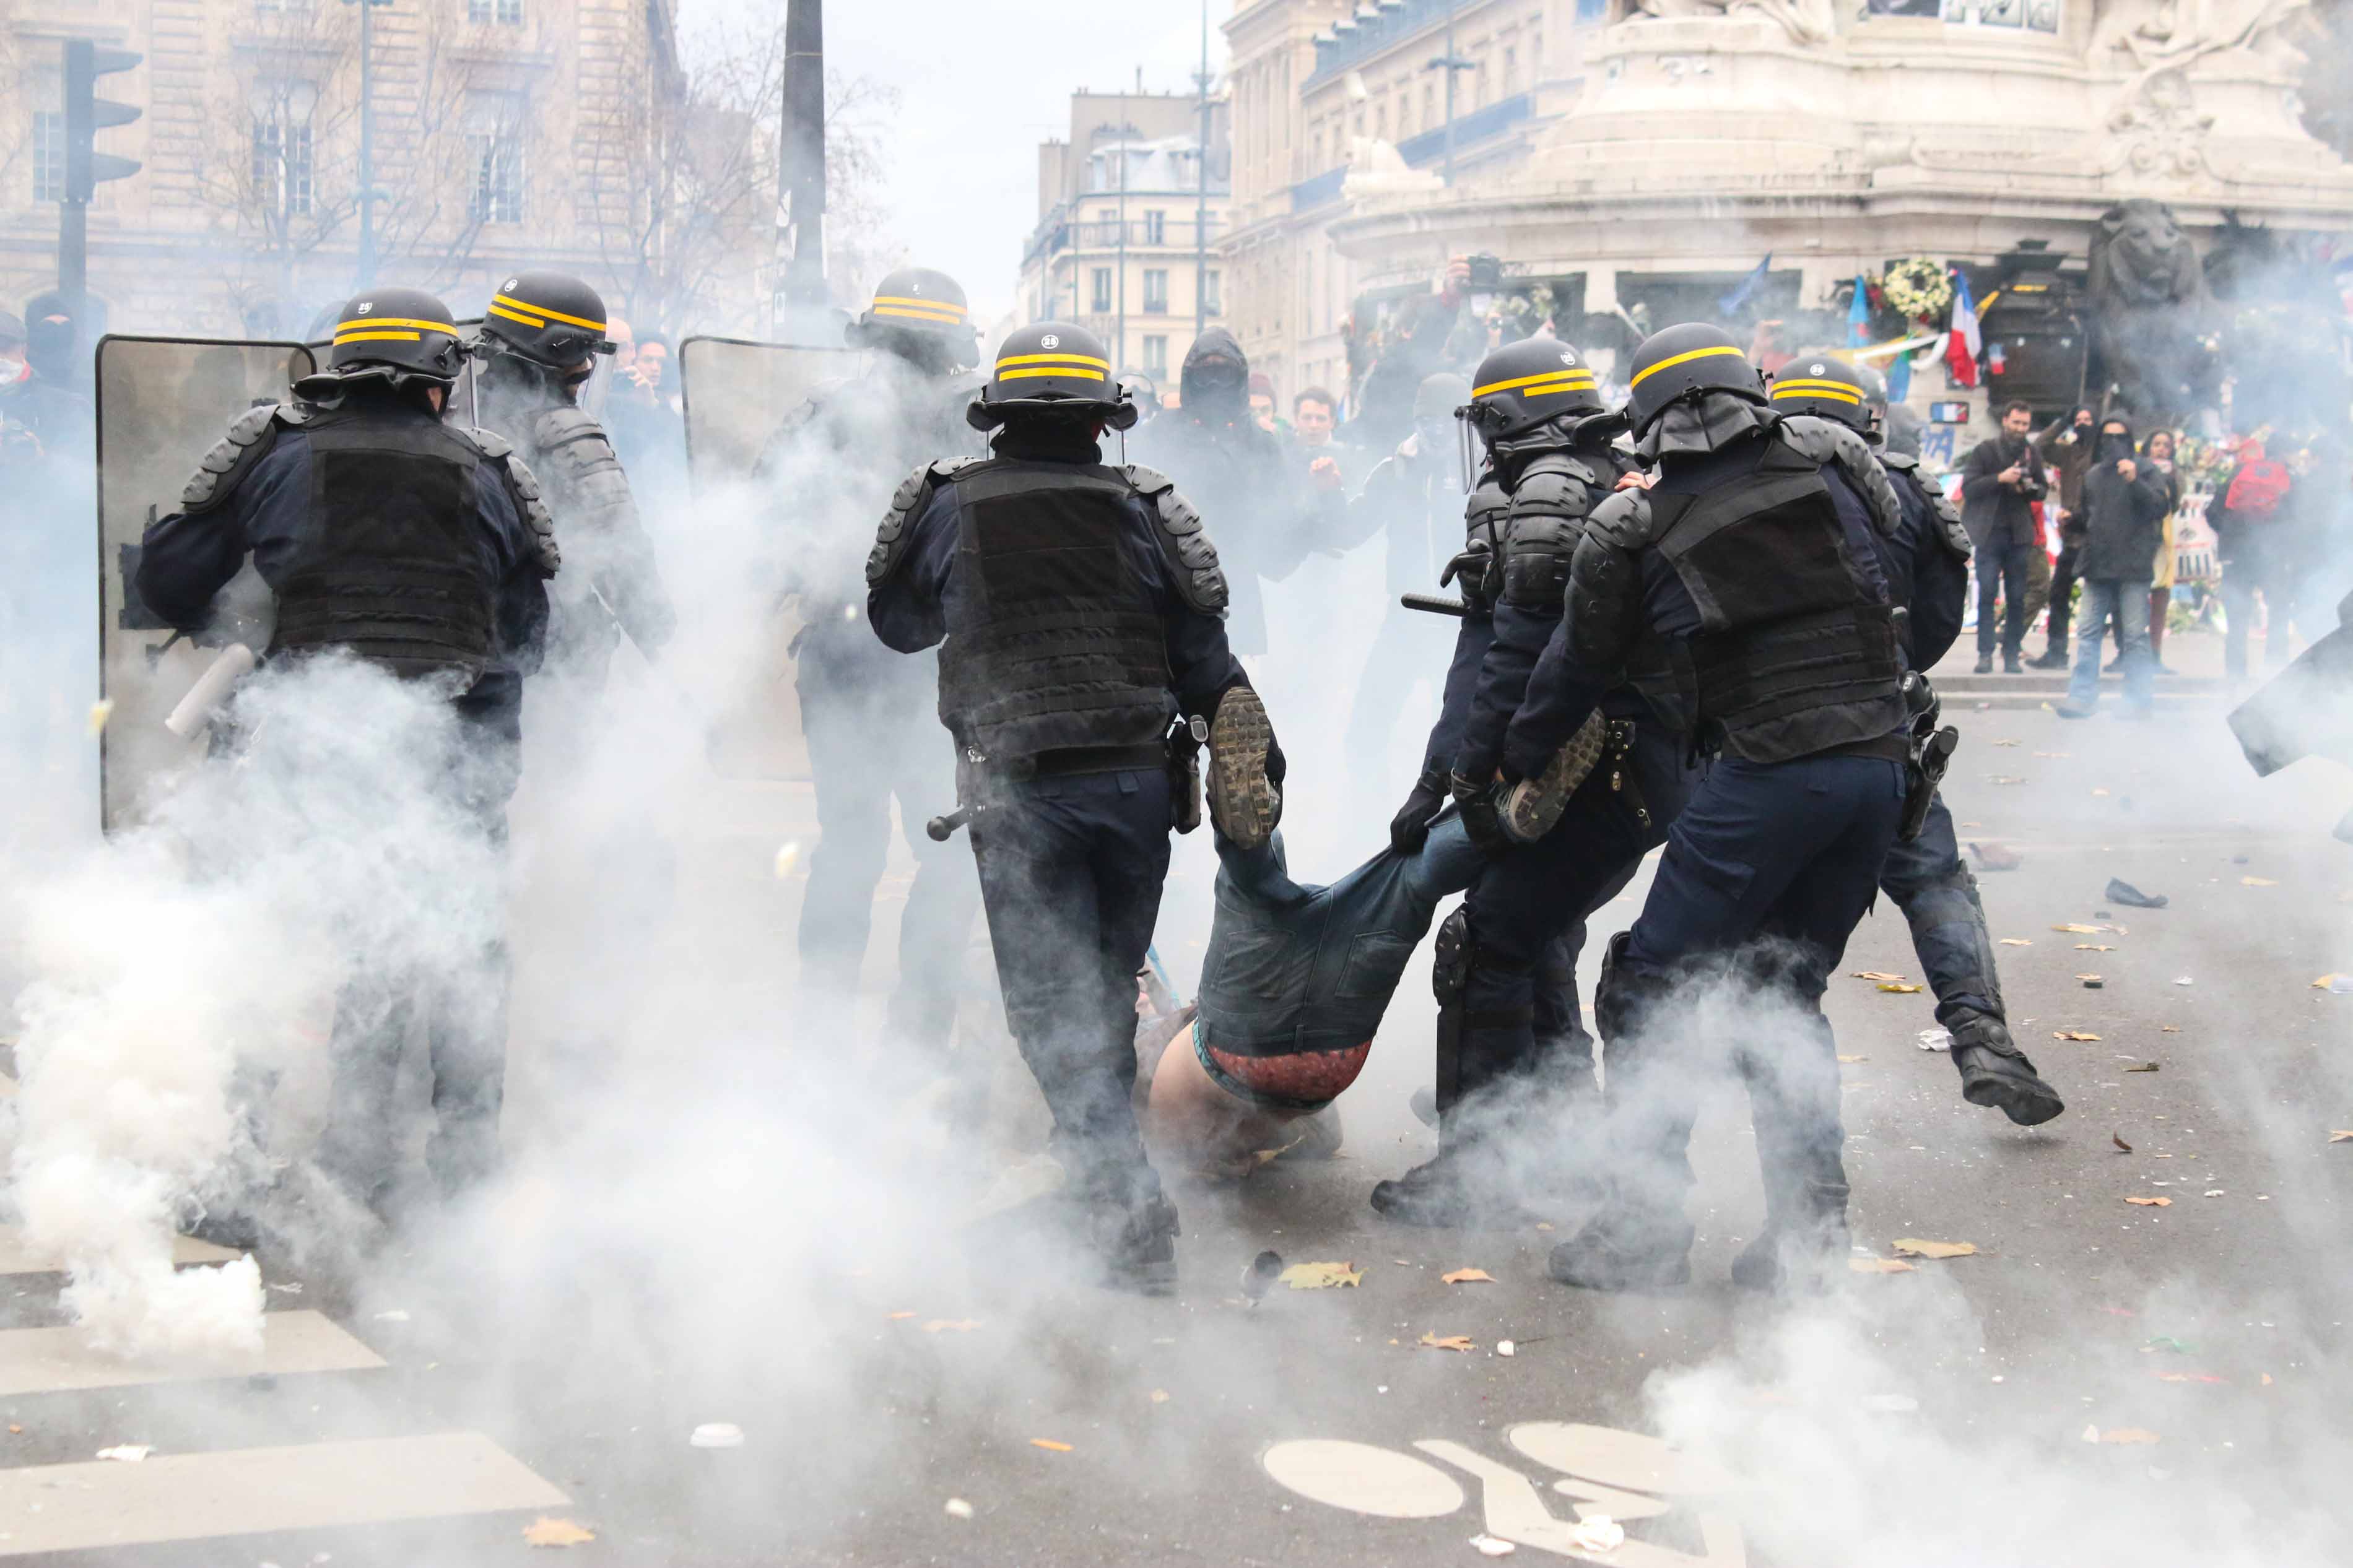 A man is violently arrested Place de la Republique, in Paris, France, during COP21 protests, November 29, 2015. The protests, forbidden under France's emergency law, were met by heavy police force leading to escalating tensions.